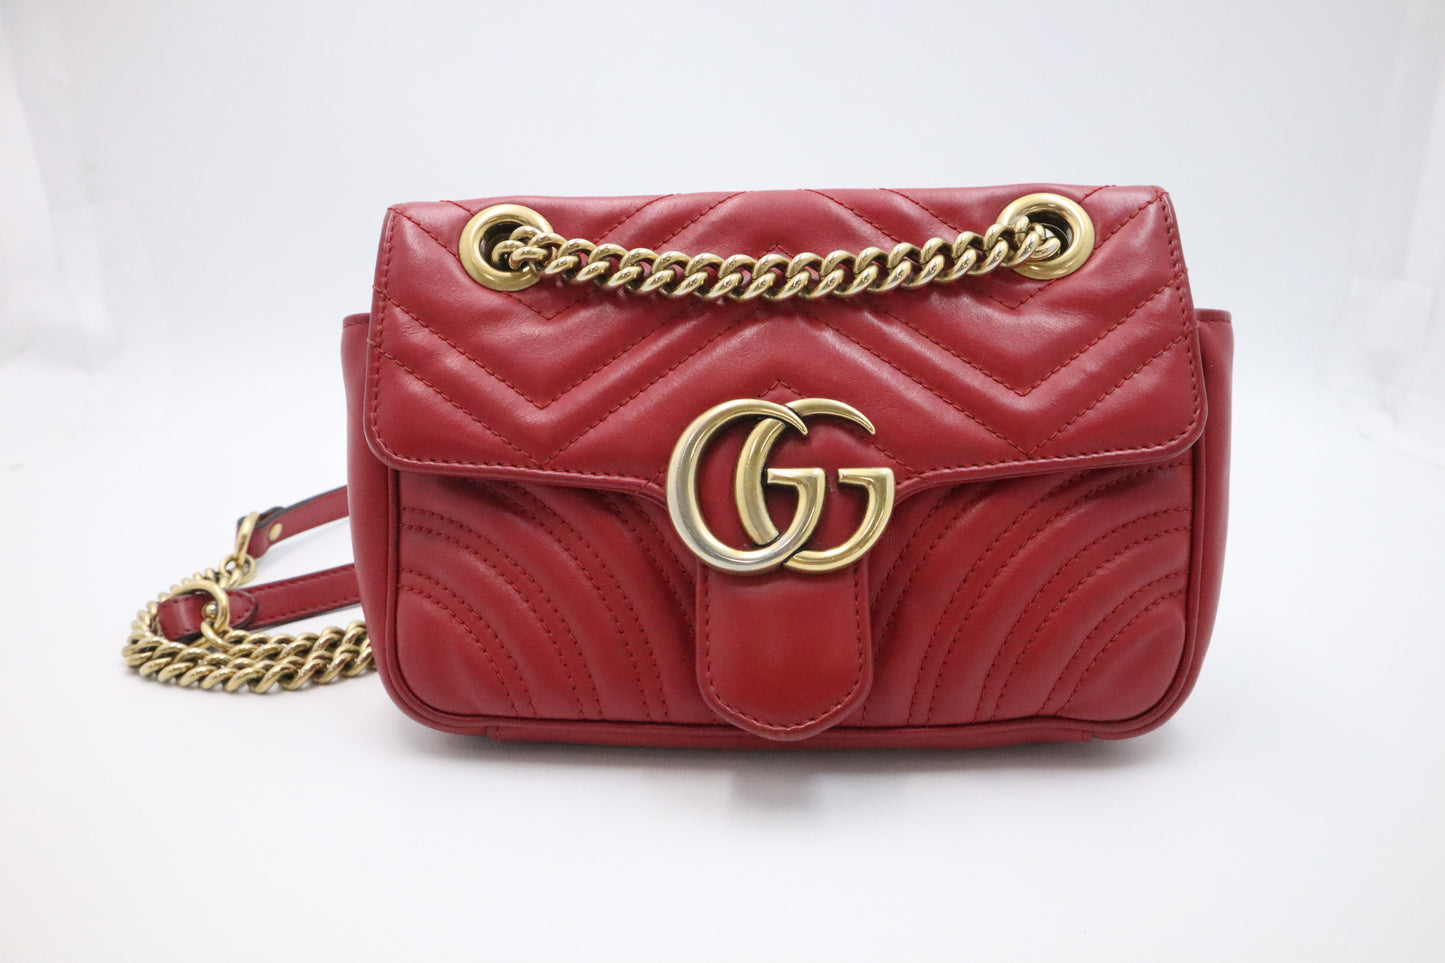 Gucci GG Marmont Mini Bag in Red Leather